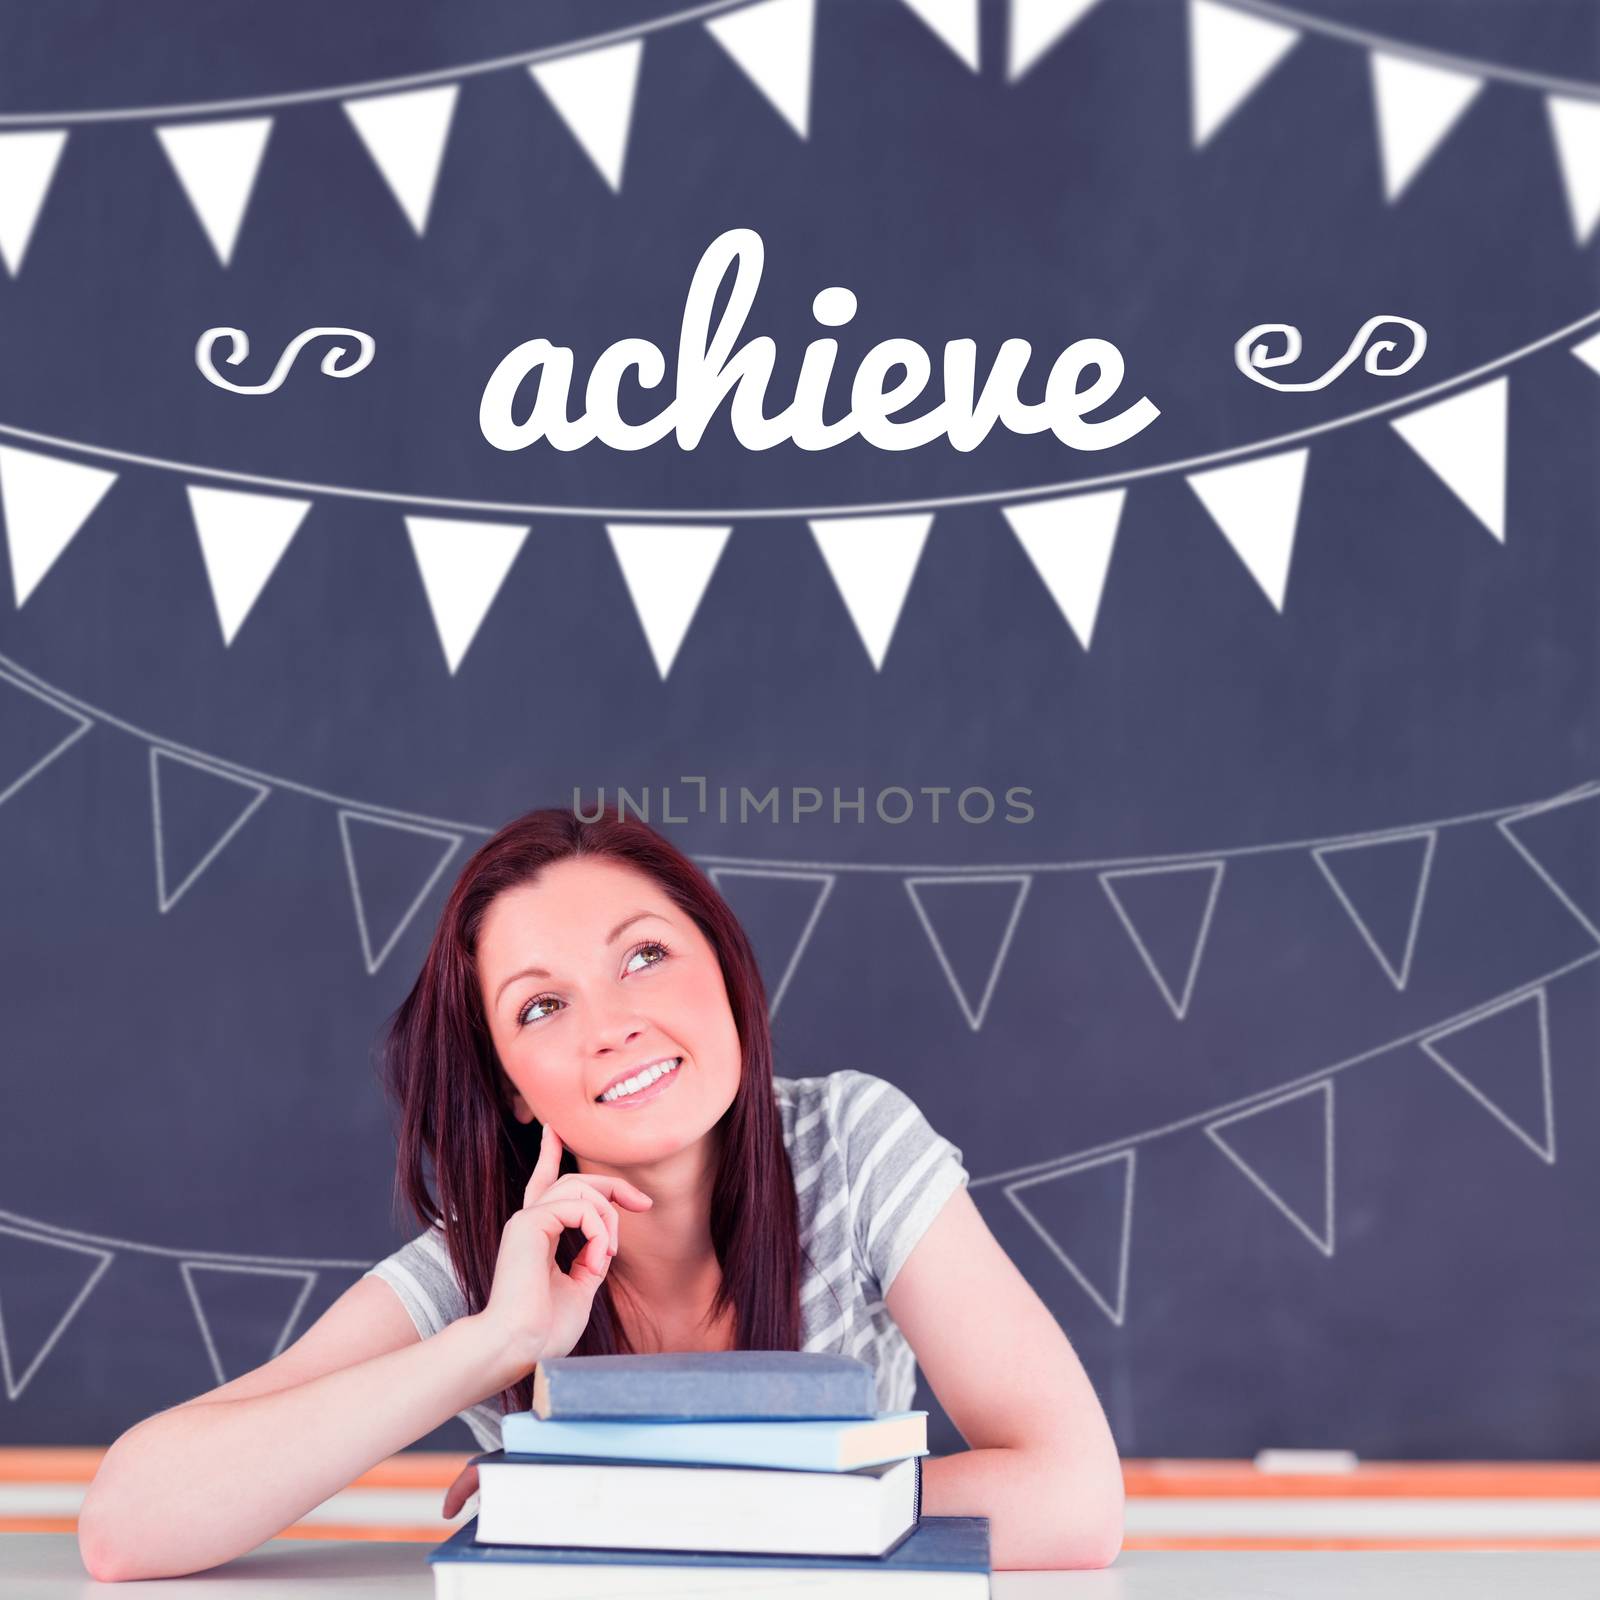 Achieve against student thinking in classroom by Wavebreakmedia